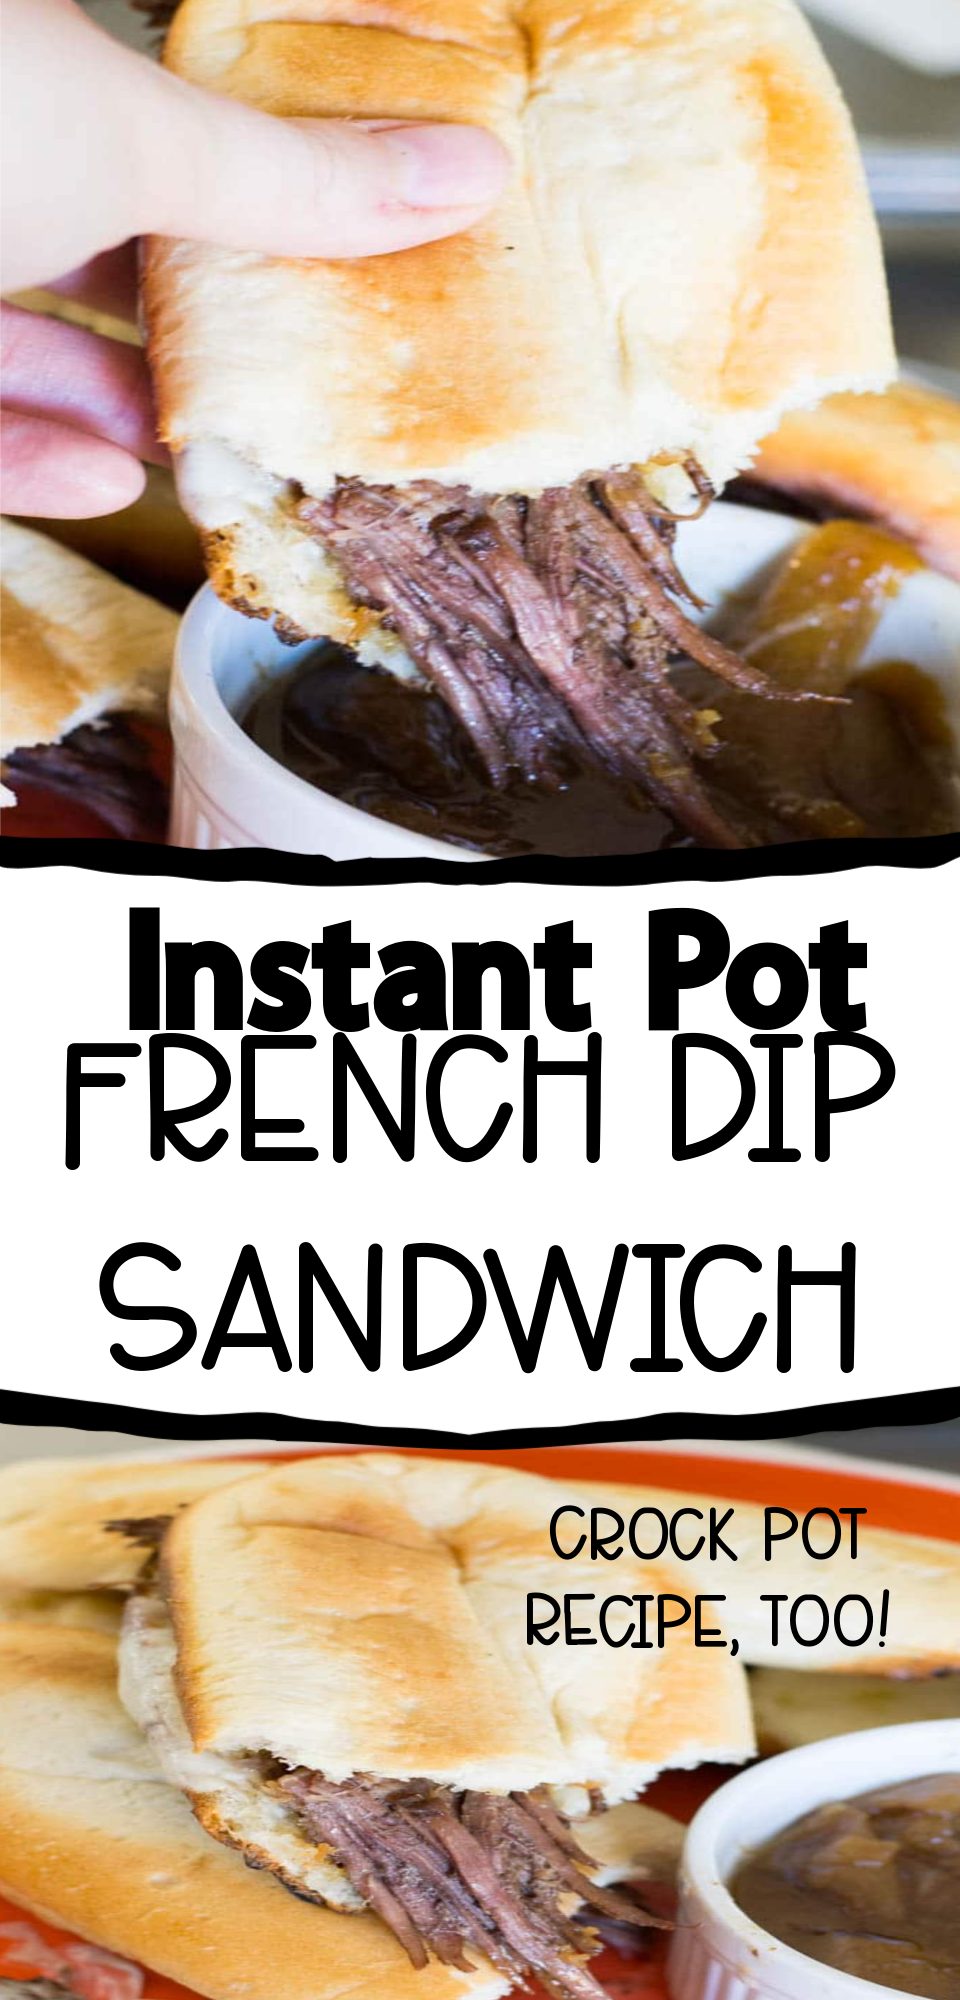  Have you ever used your Instant Pot? If not, you're missing out! This amazing kitchen appliance can do just about anything, and today we're going to use it to make French dip sandwiches. They're easy to make and so delicious! Plus, they're perfect for a quick and easy dinner